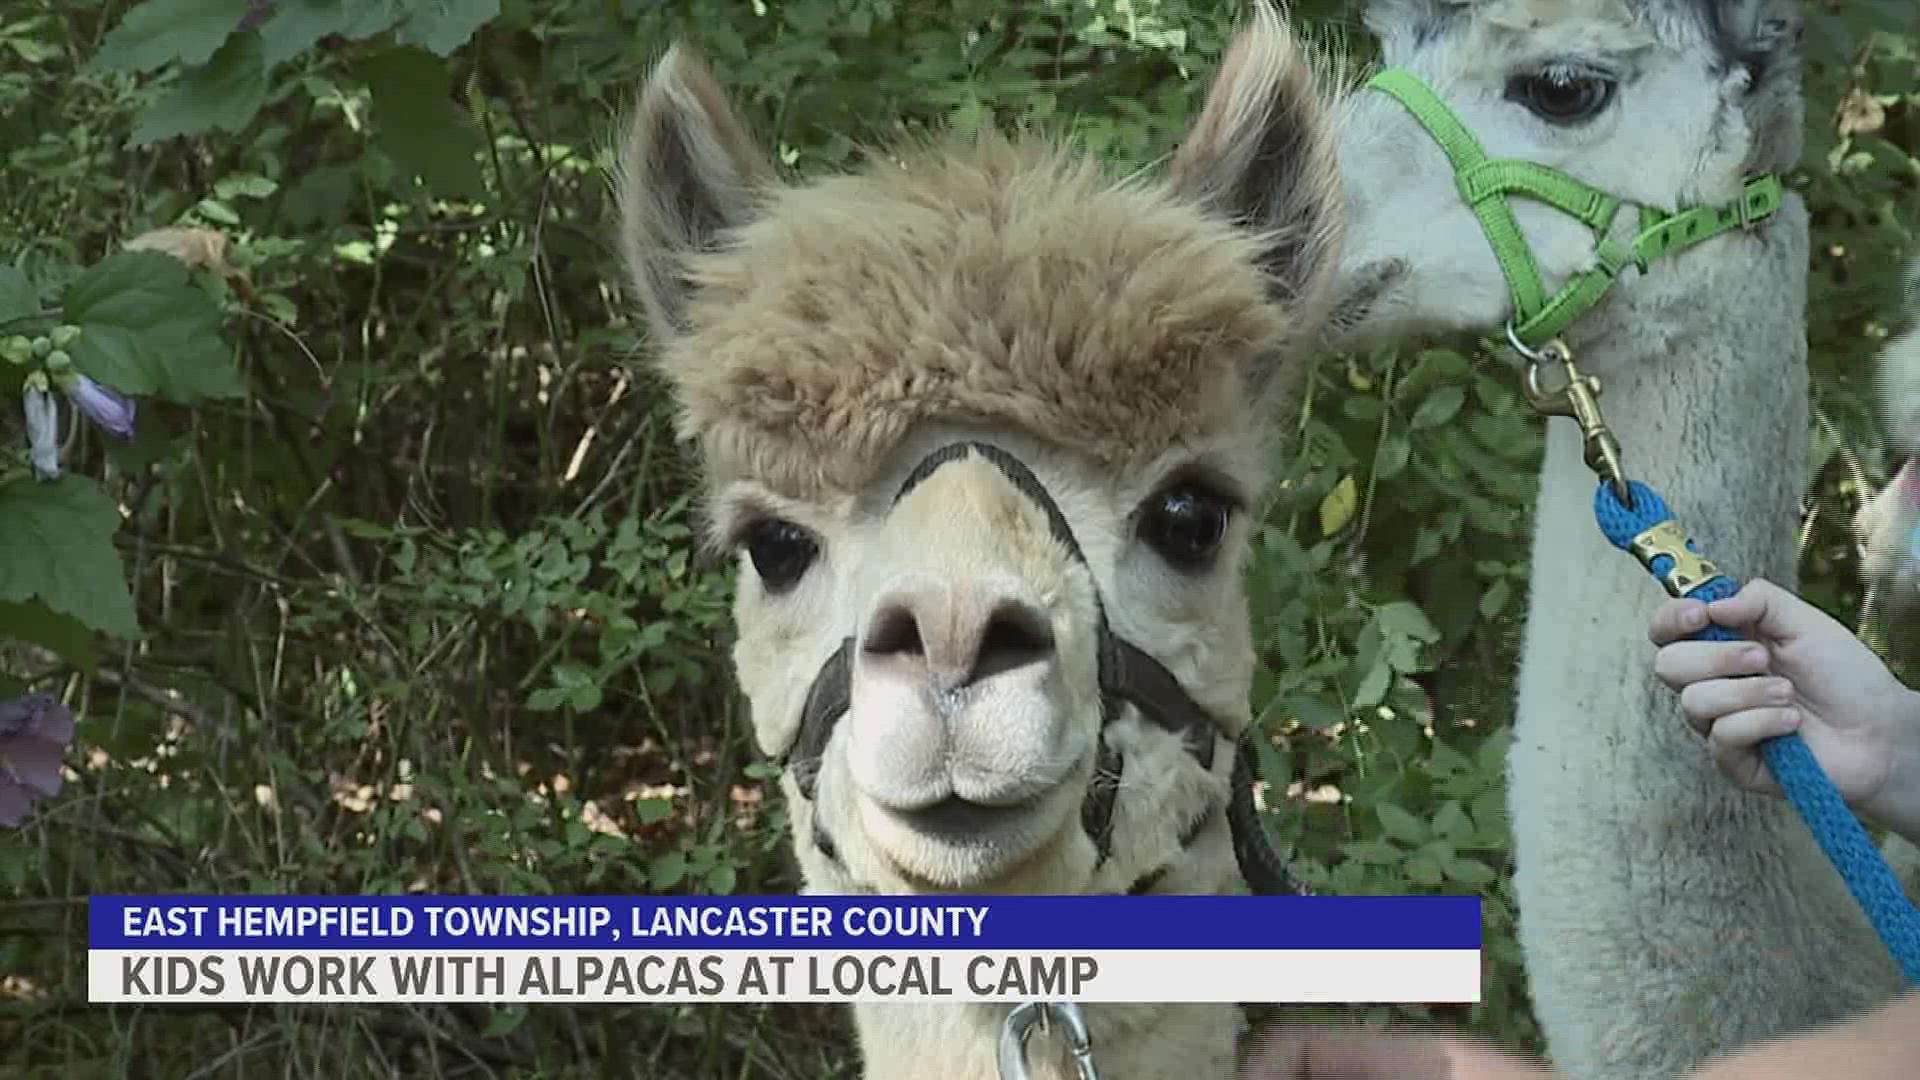 The week-long camp is for kids ages nine through 16 and allows campers to form a special connection with the alpacas.